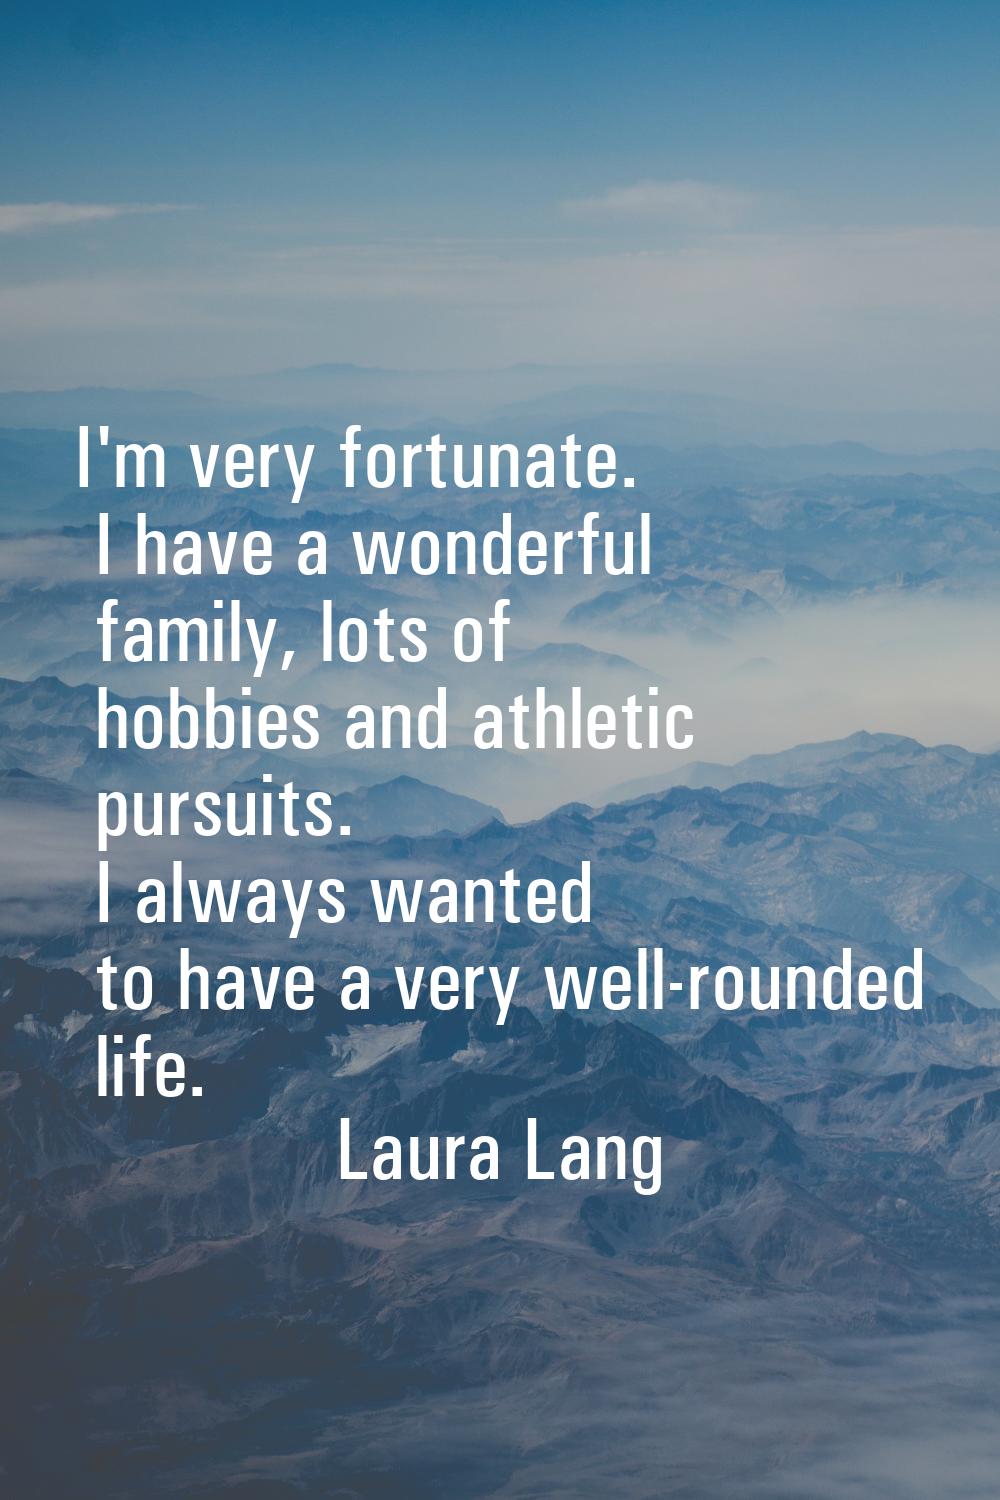 I'm very fortunate. I have a wonderful family, lots of hobbies and athletic pursuits. I always want